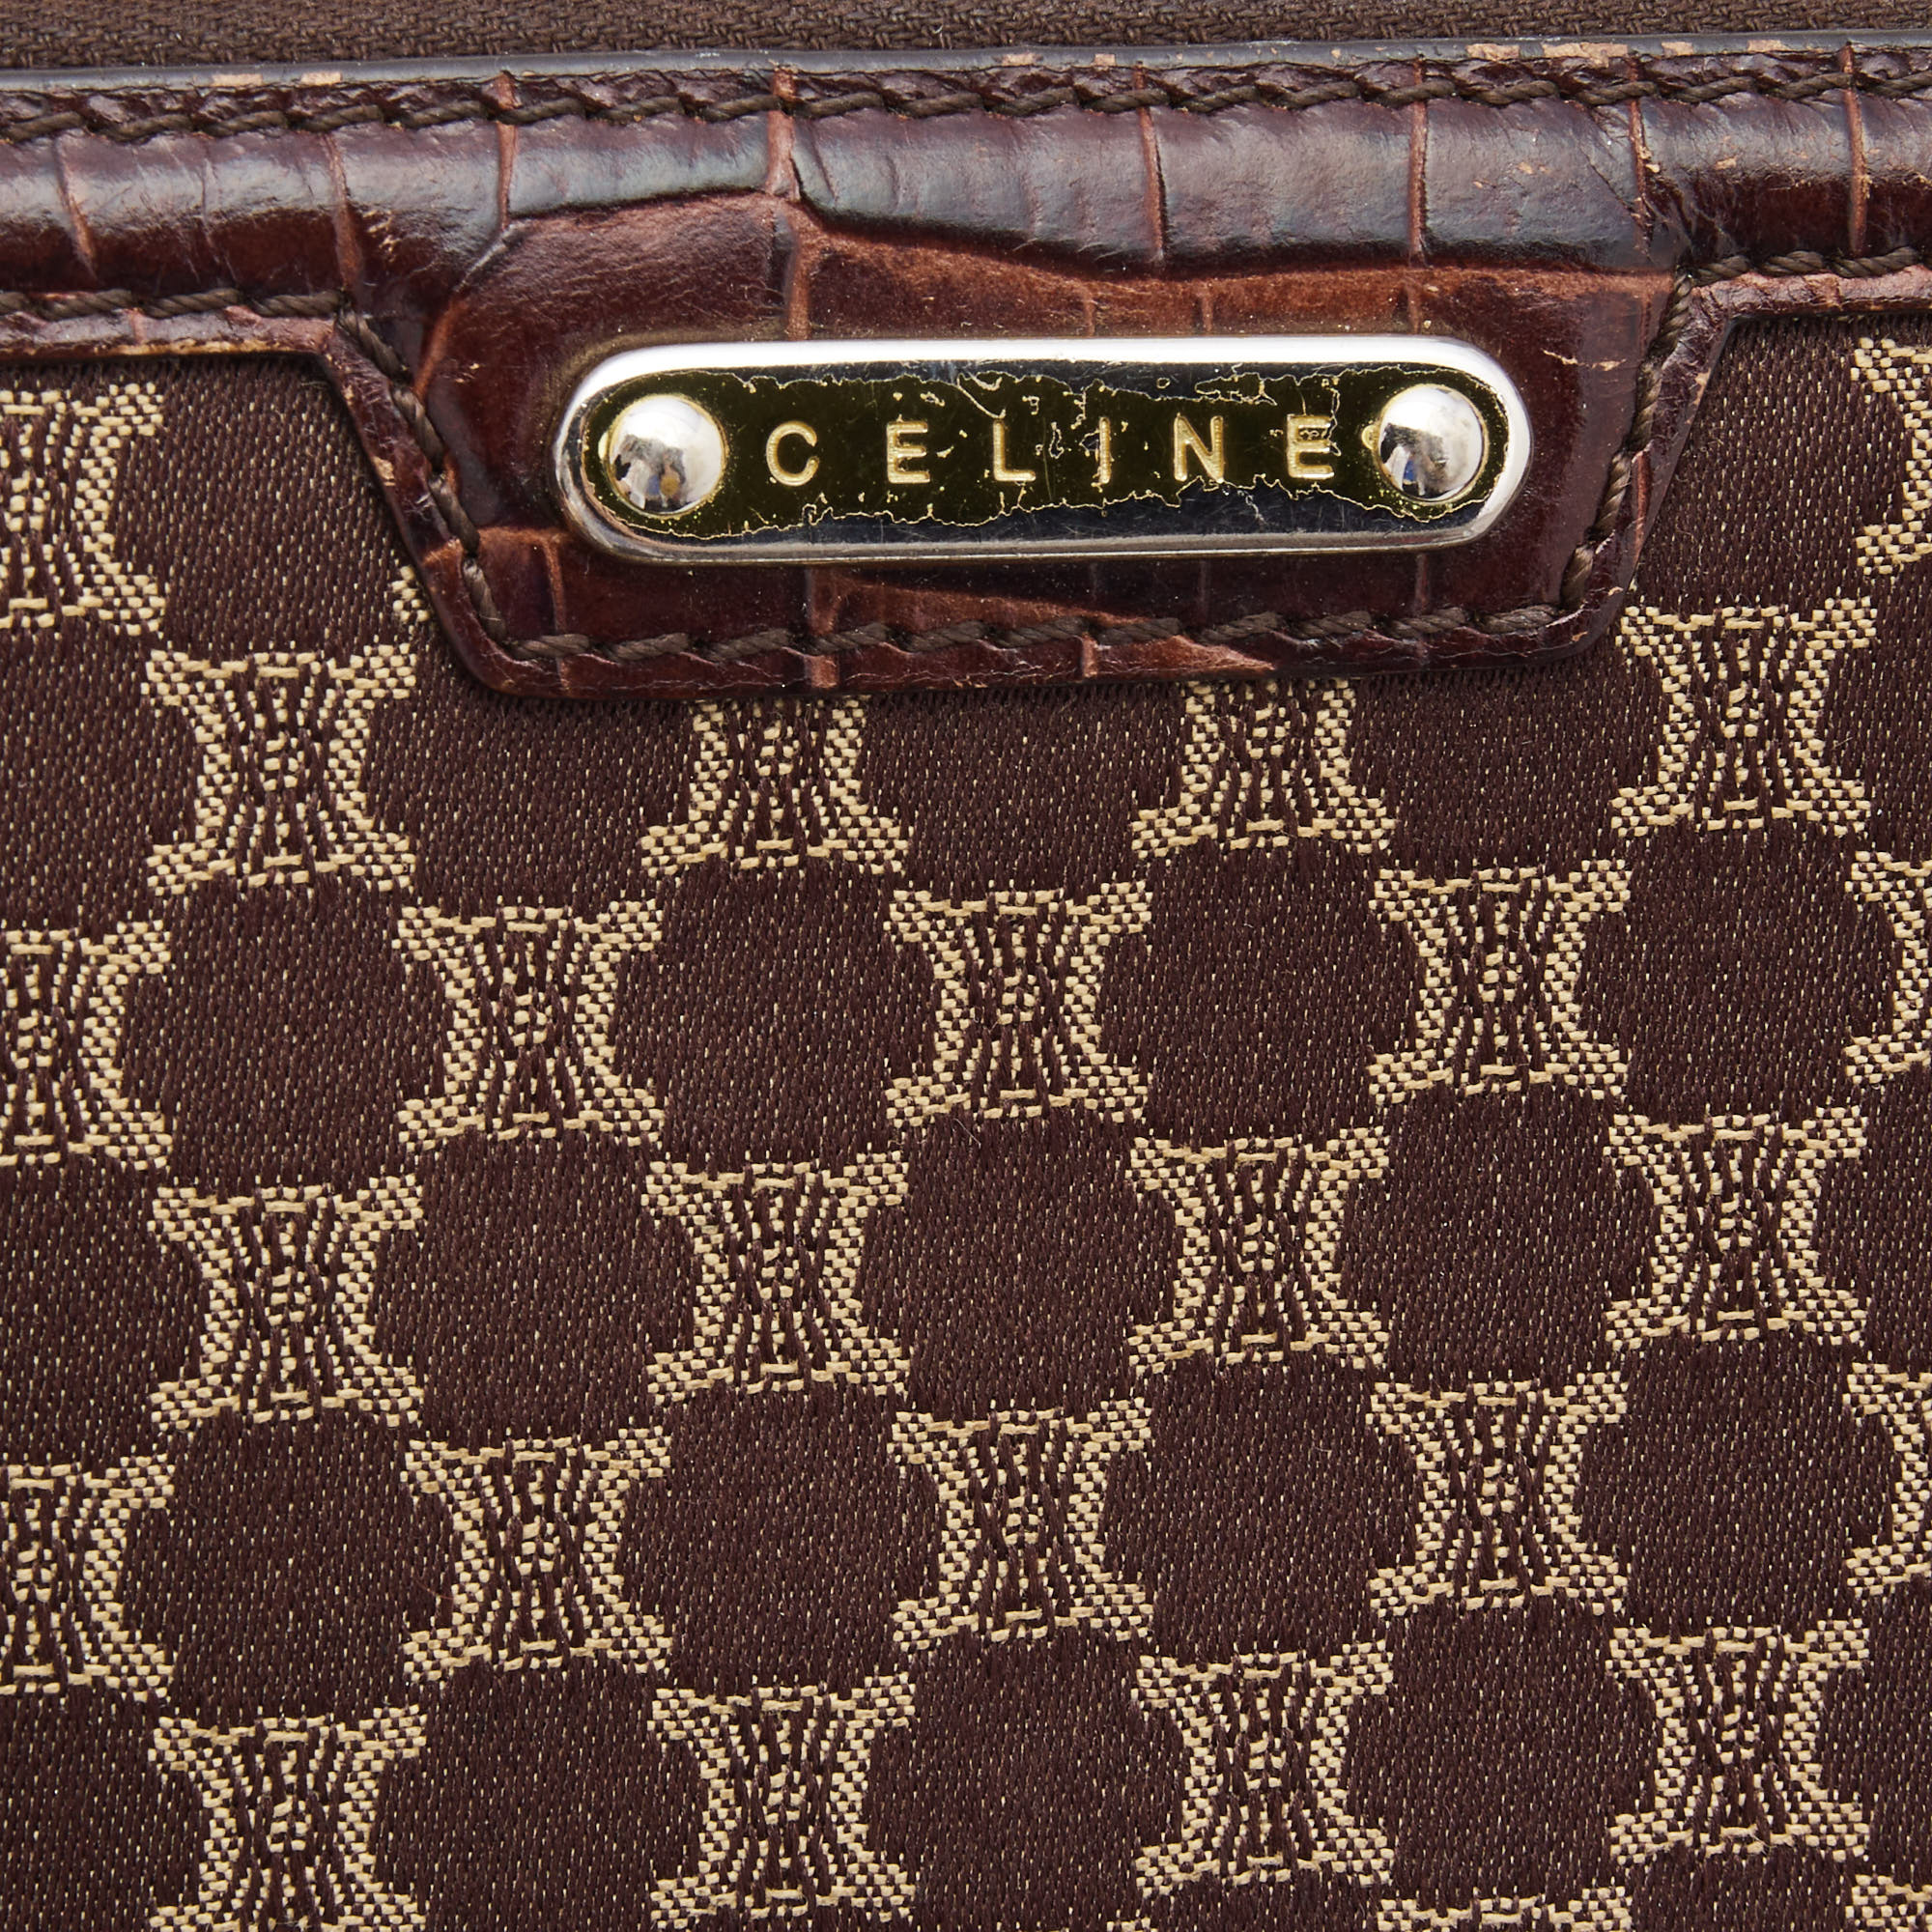 Celine Brown Macadam Canvas And Croc Embossed Leather Zip Around Continental Wallet